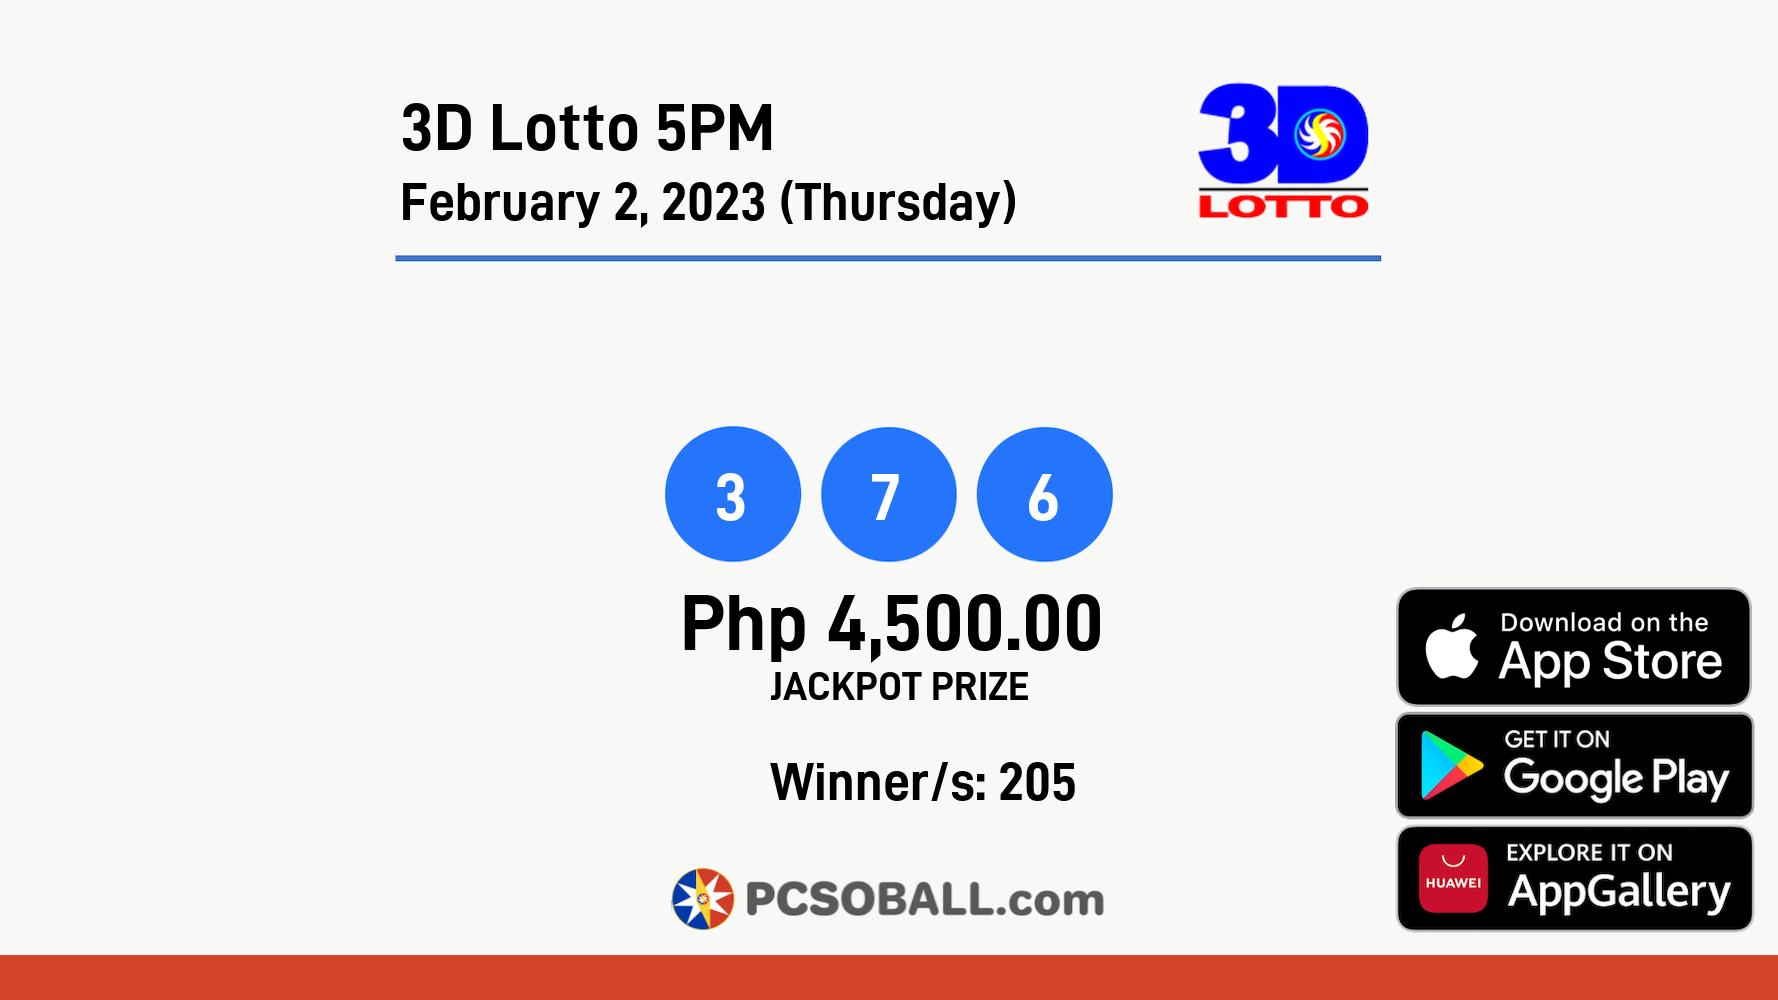 3D Lotto 5PM February 2, 2023 (Thursday) Result